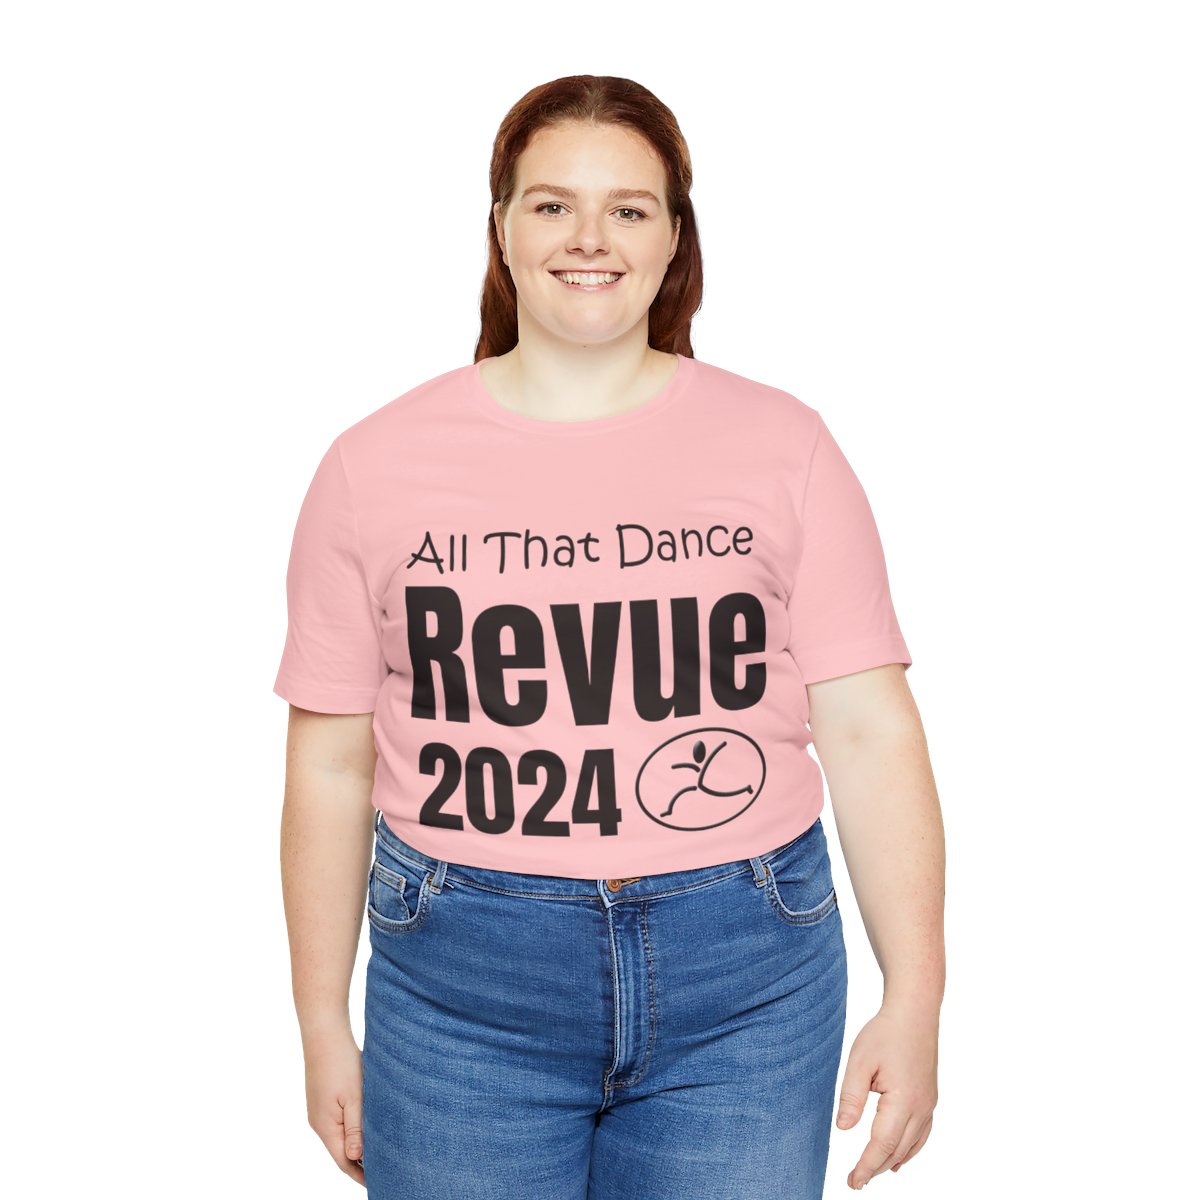 Adult Sizes - All That Dance Revue 2024 Tshirt product thumbnail image